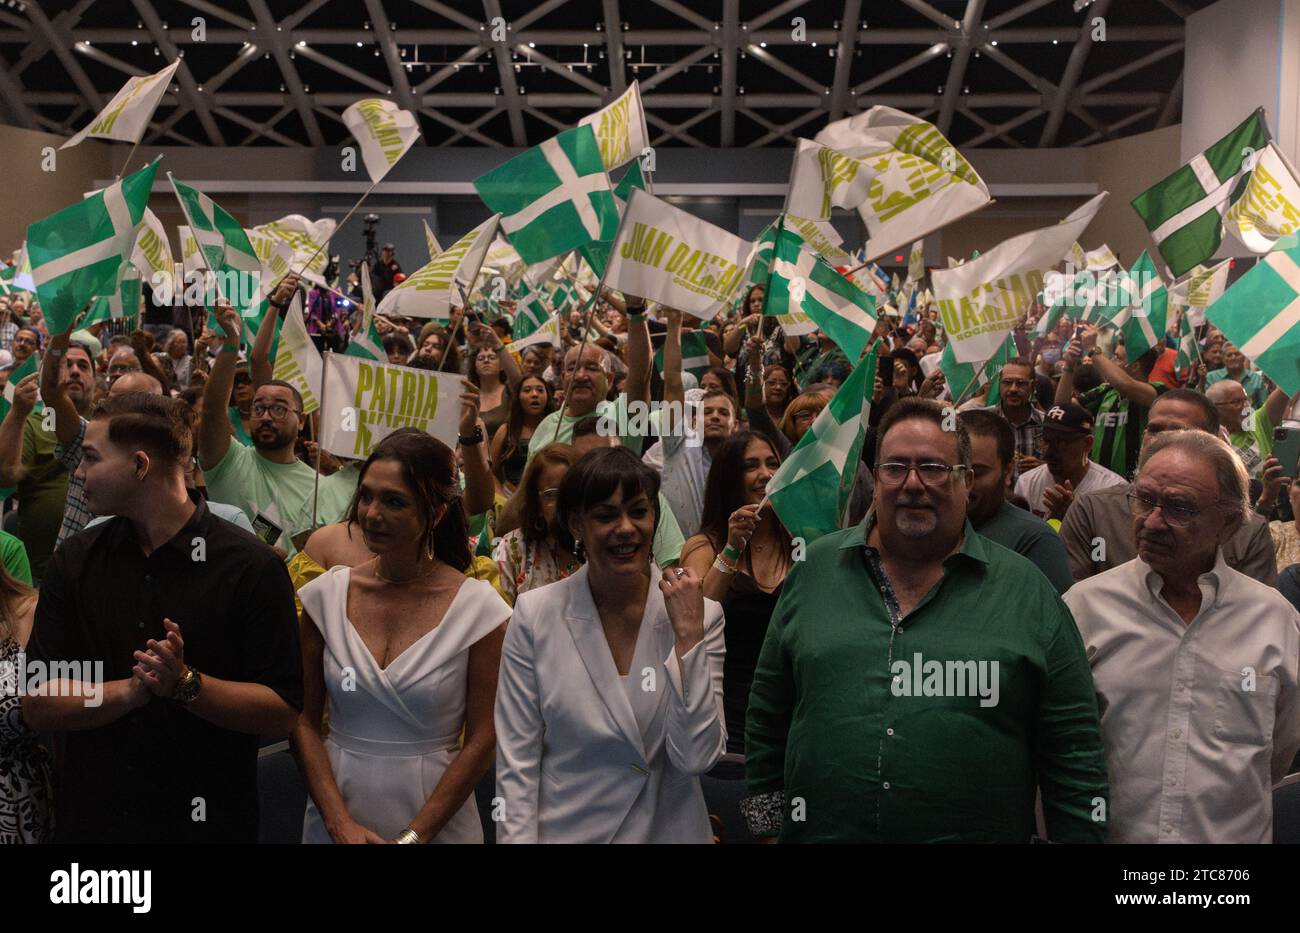 San Juan, USA. 10th Dec, 2023. María de Lourdes Santiago (middle), Denis Márquez Lebrón (middle-right), members of the Puerto Rican Senate and House, respectively, arrive at the Puerto Rican Independence Party (PIP) National Convention in San Juan, Puerto Rico on Dec. 10, 2023. Both announced they would be running to retain their seats in the 2024 elections. (Photo by Carlos Berríos Polanco/Sipa USA) Credit: Sipa USA/Alamy Live News Stock Photo